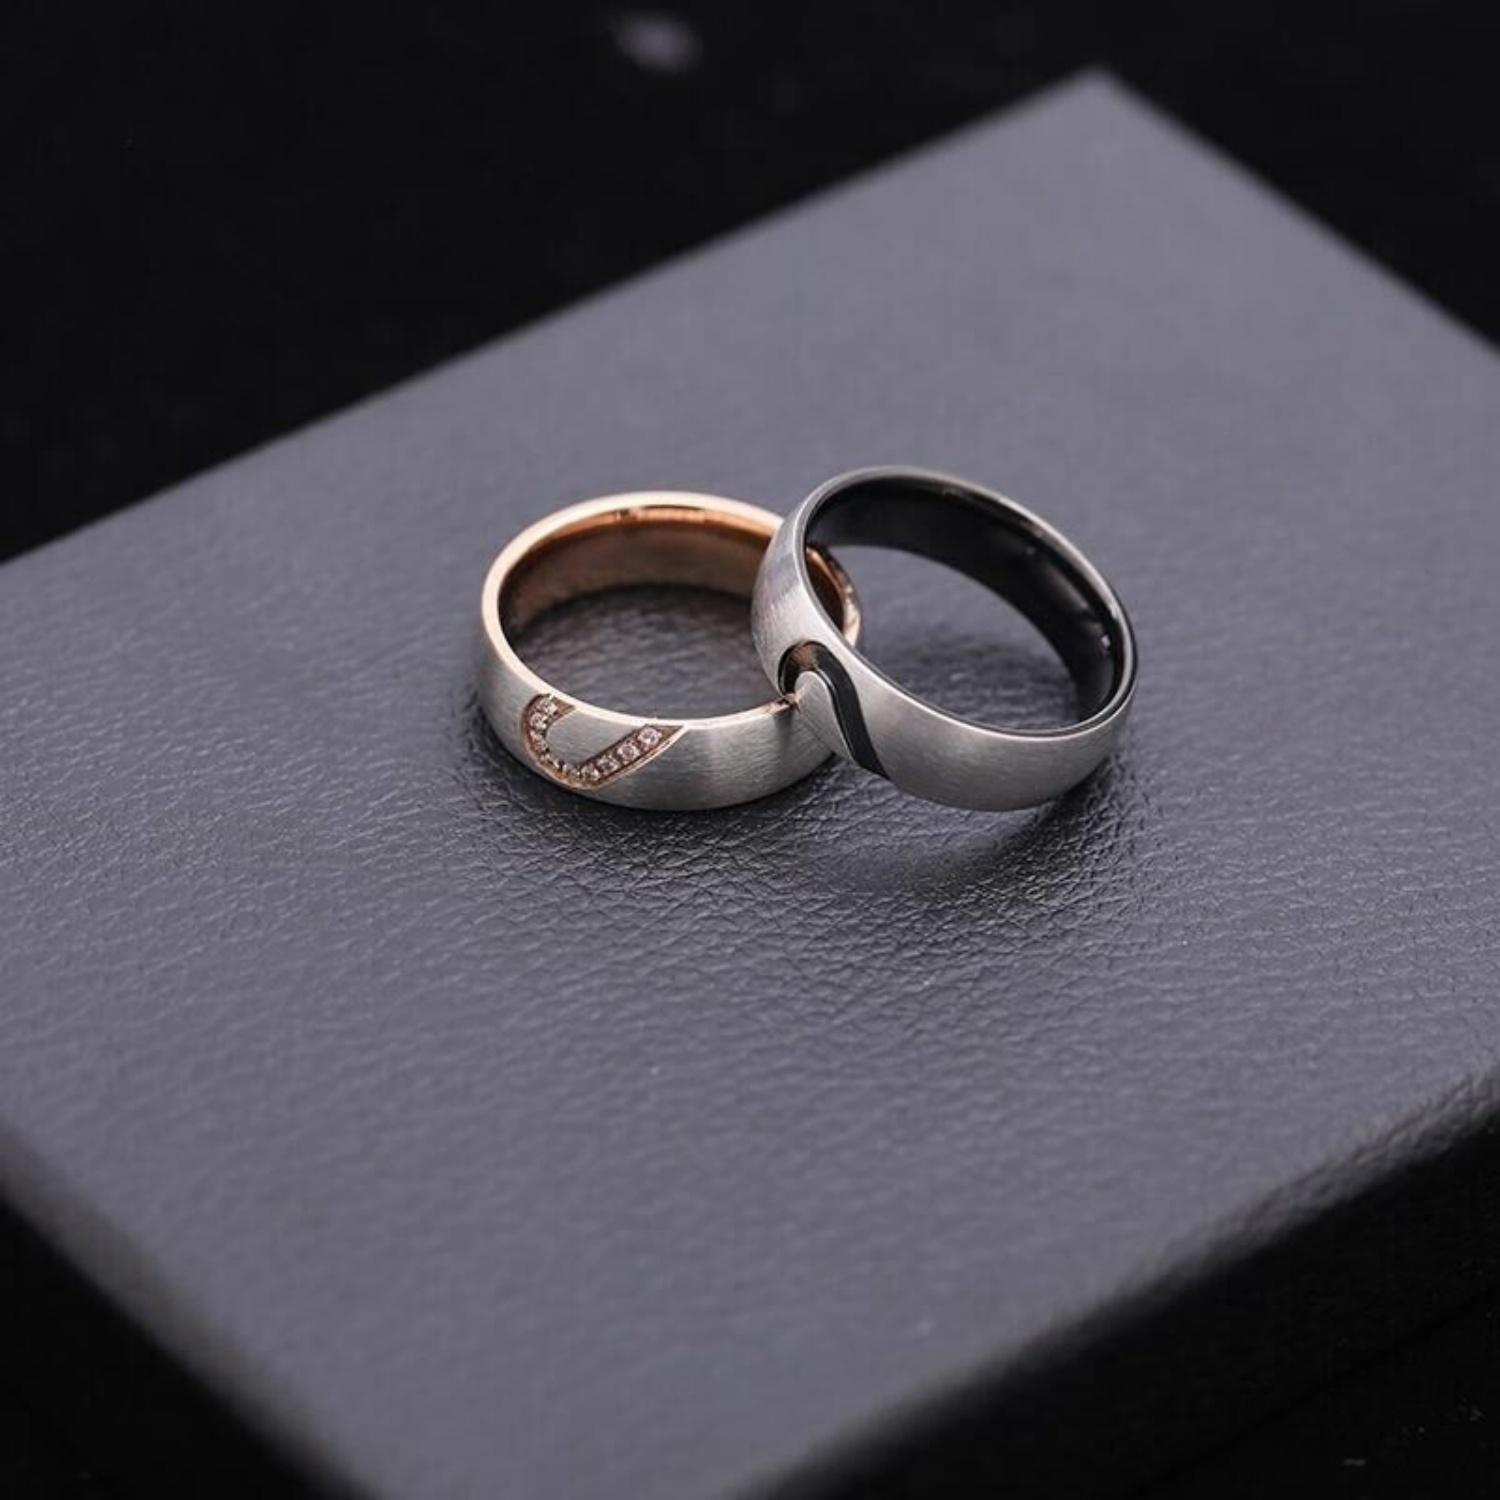 Black And Rose Matching Heart Rings For Couples In Titanium Steel - CoupleSets